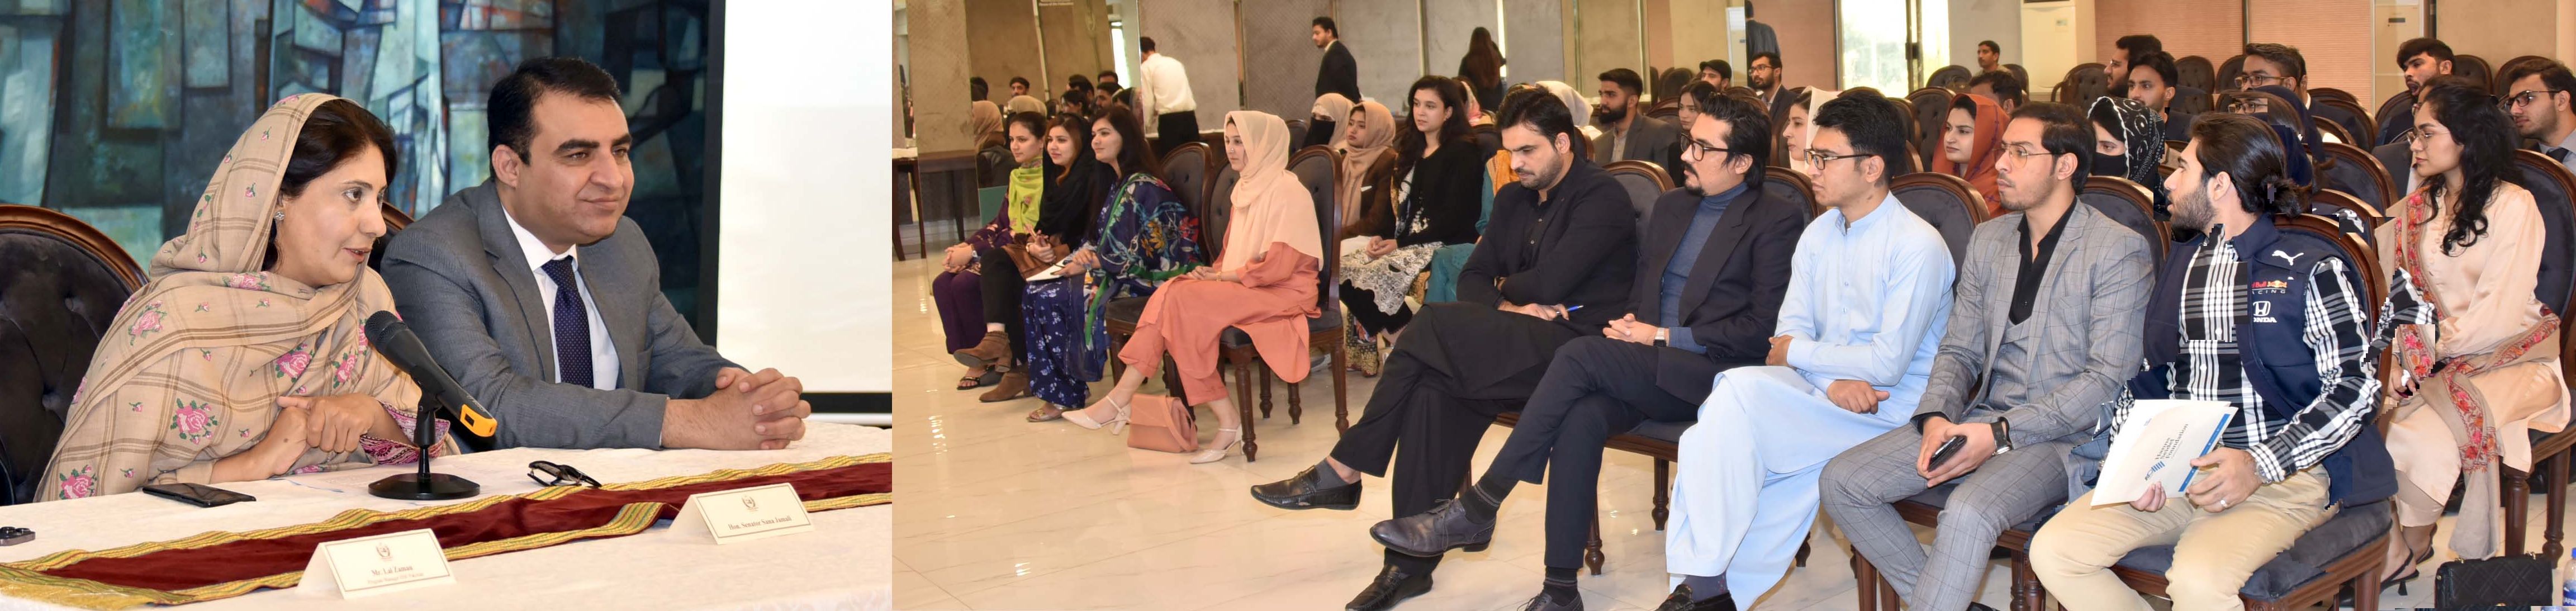 Senator Sana Jamali, Briefing the Group of Students from Various Universities of Pakistan Under Model Council of Common Interests (CCI) Project of The Hanns Seidel Foundation (HSF) about Working of Senate at Parliament House, Islamabad 